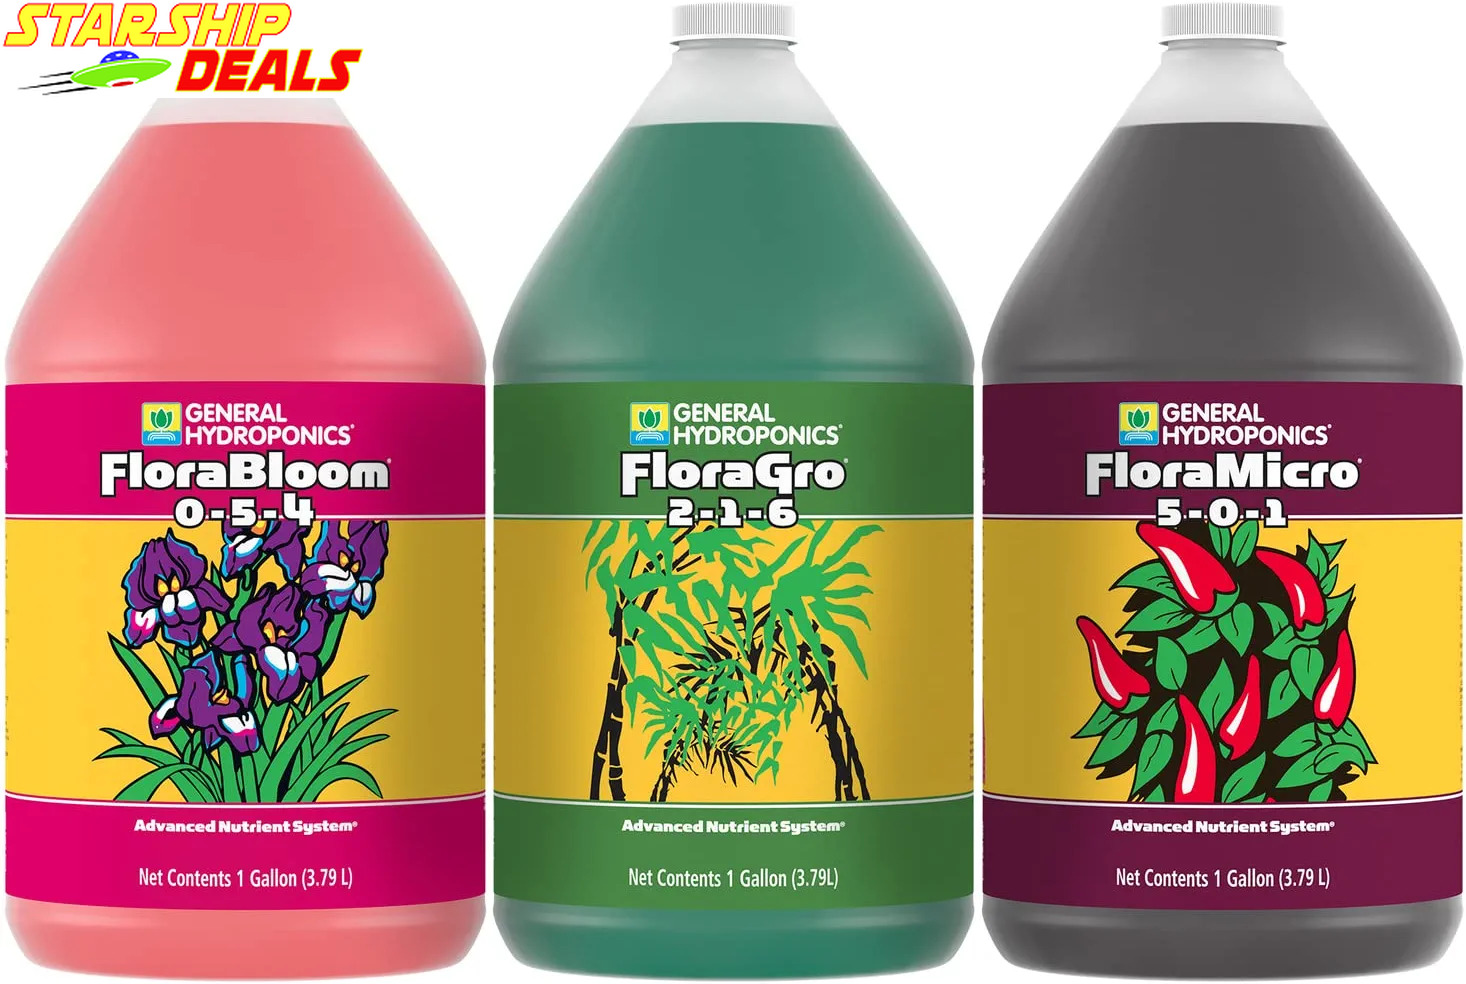 General Hydroponics Floraseries Hydroponic Nutrient Fertilizer System with Flora